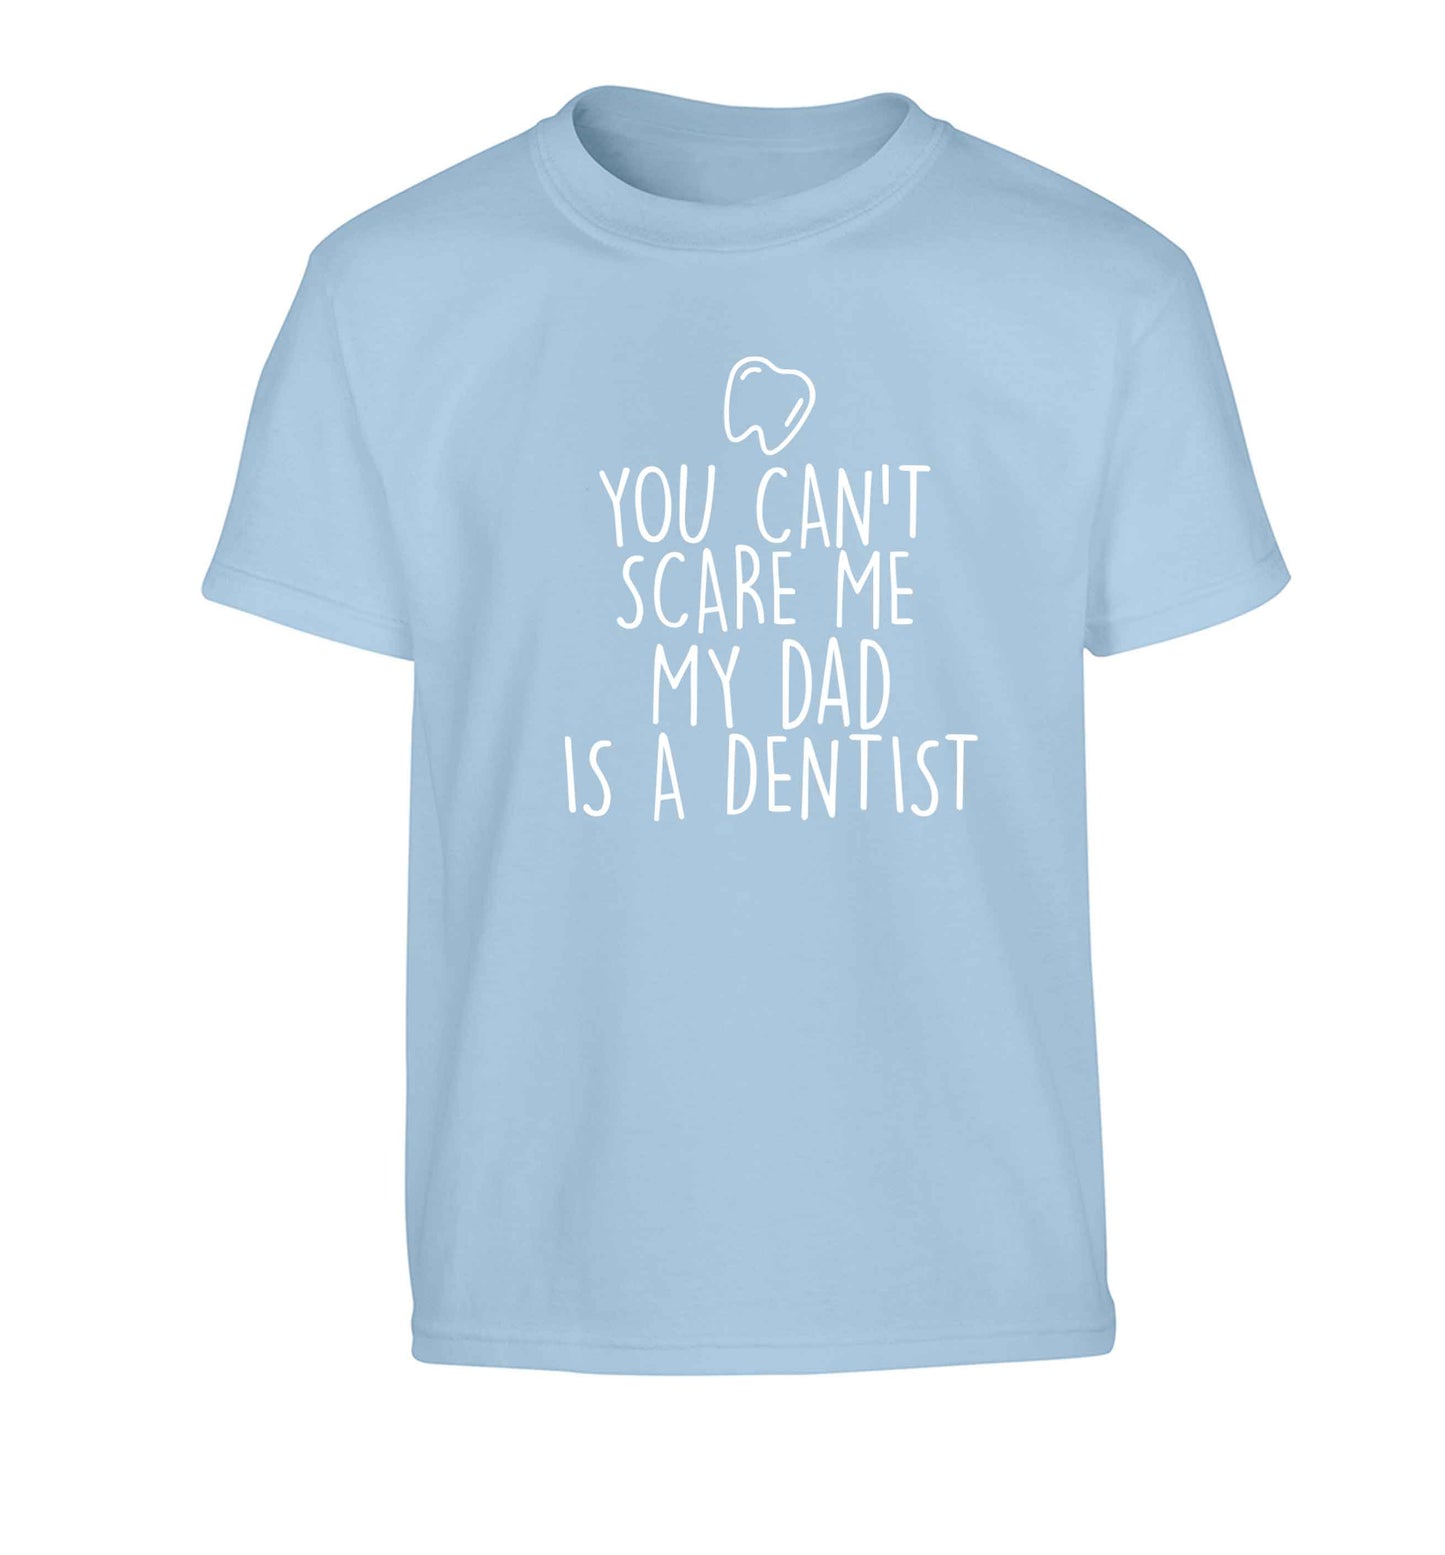 You can't scare me my dad is a dentist Children's light blue Tshirt 12-13 Years